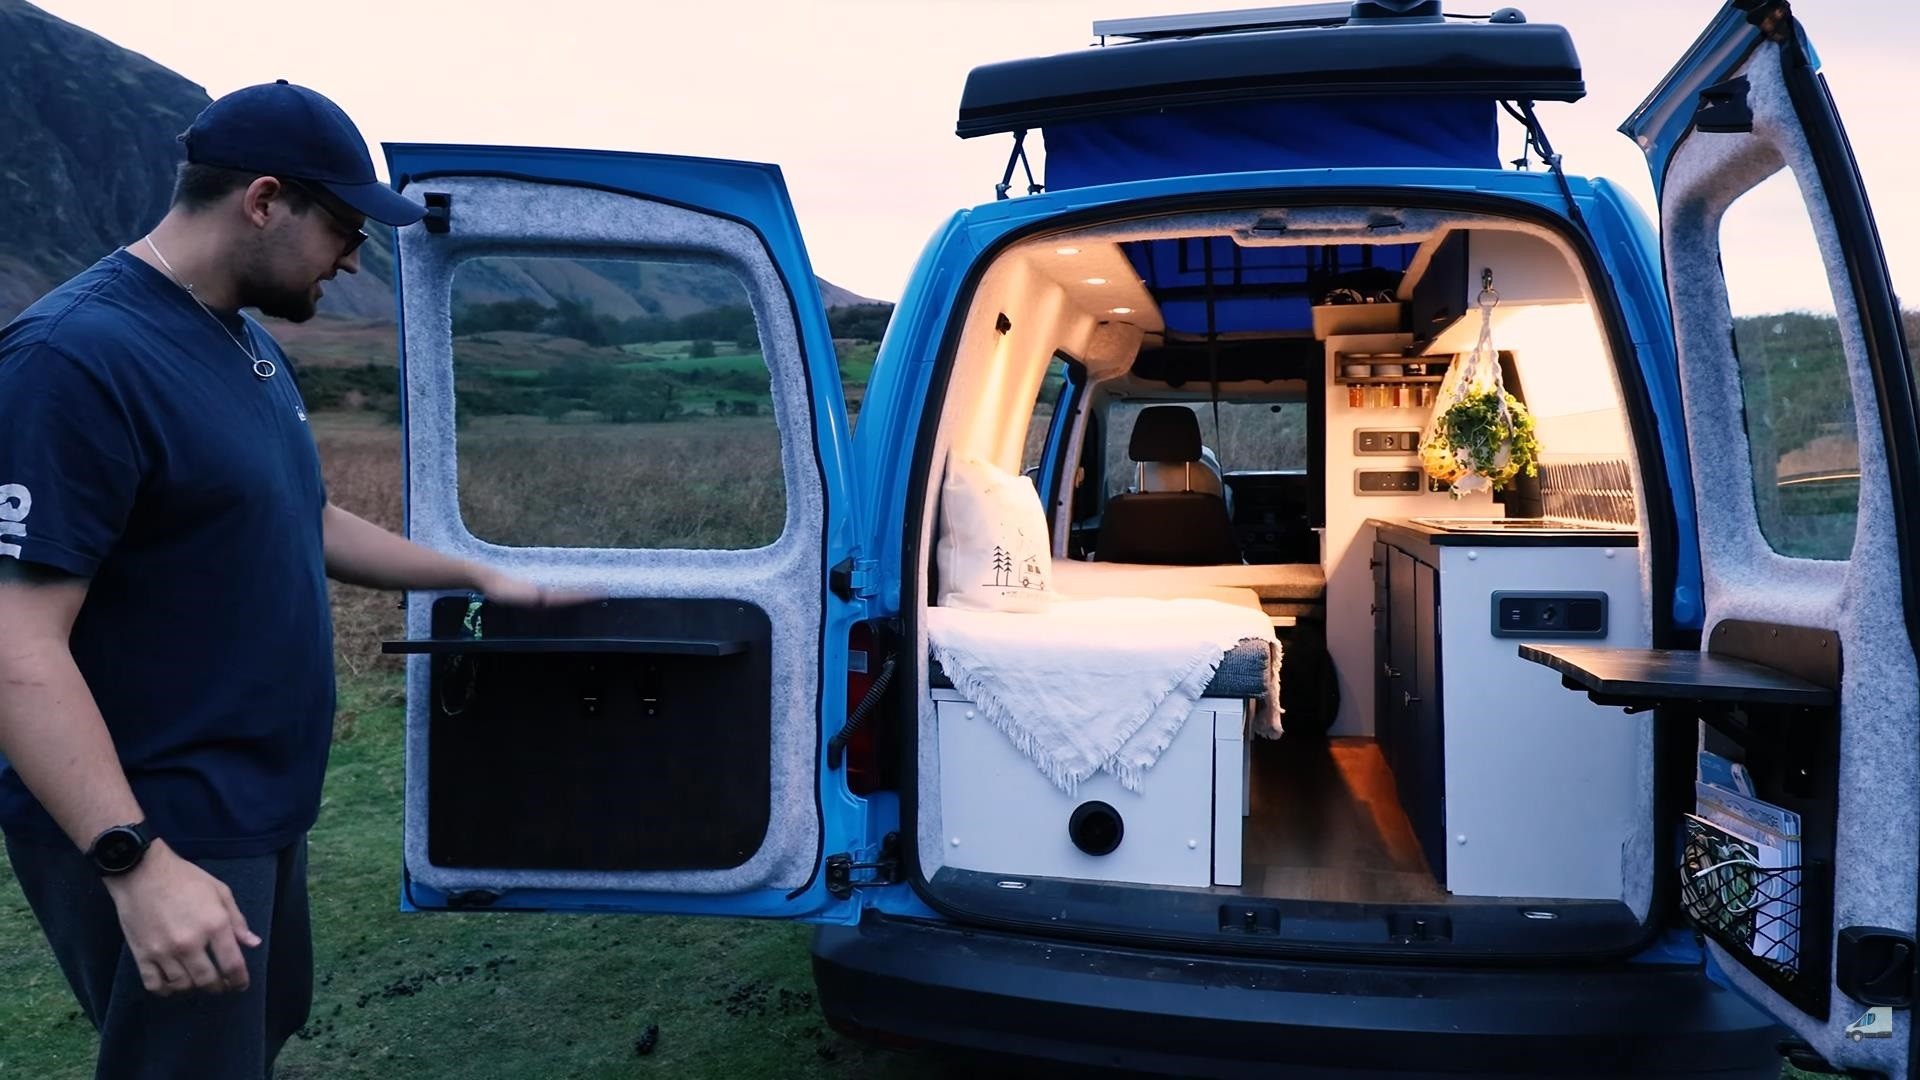 https://s1.cdn.autoevolution.com/images/news/gallery/diy-micro-camper-integrates-much-needed-practical-features-into-a-minuscule-space_4.jpg